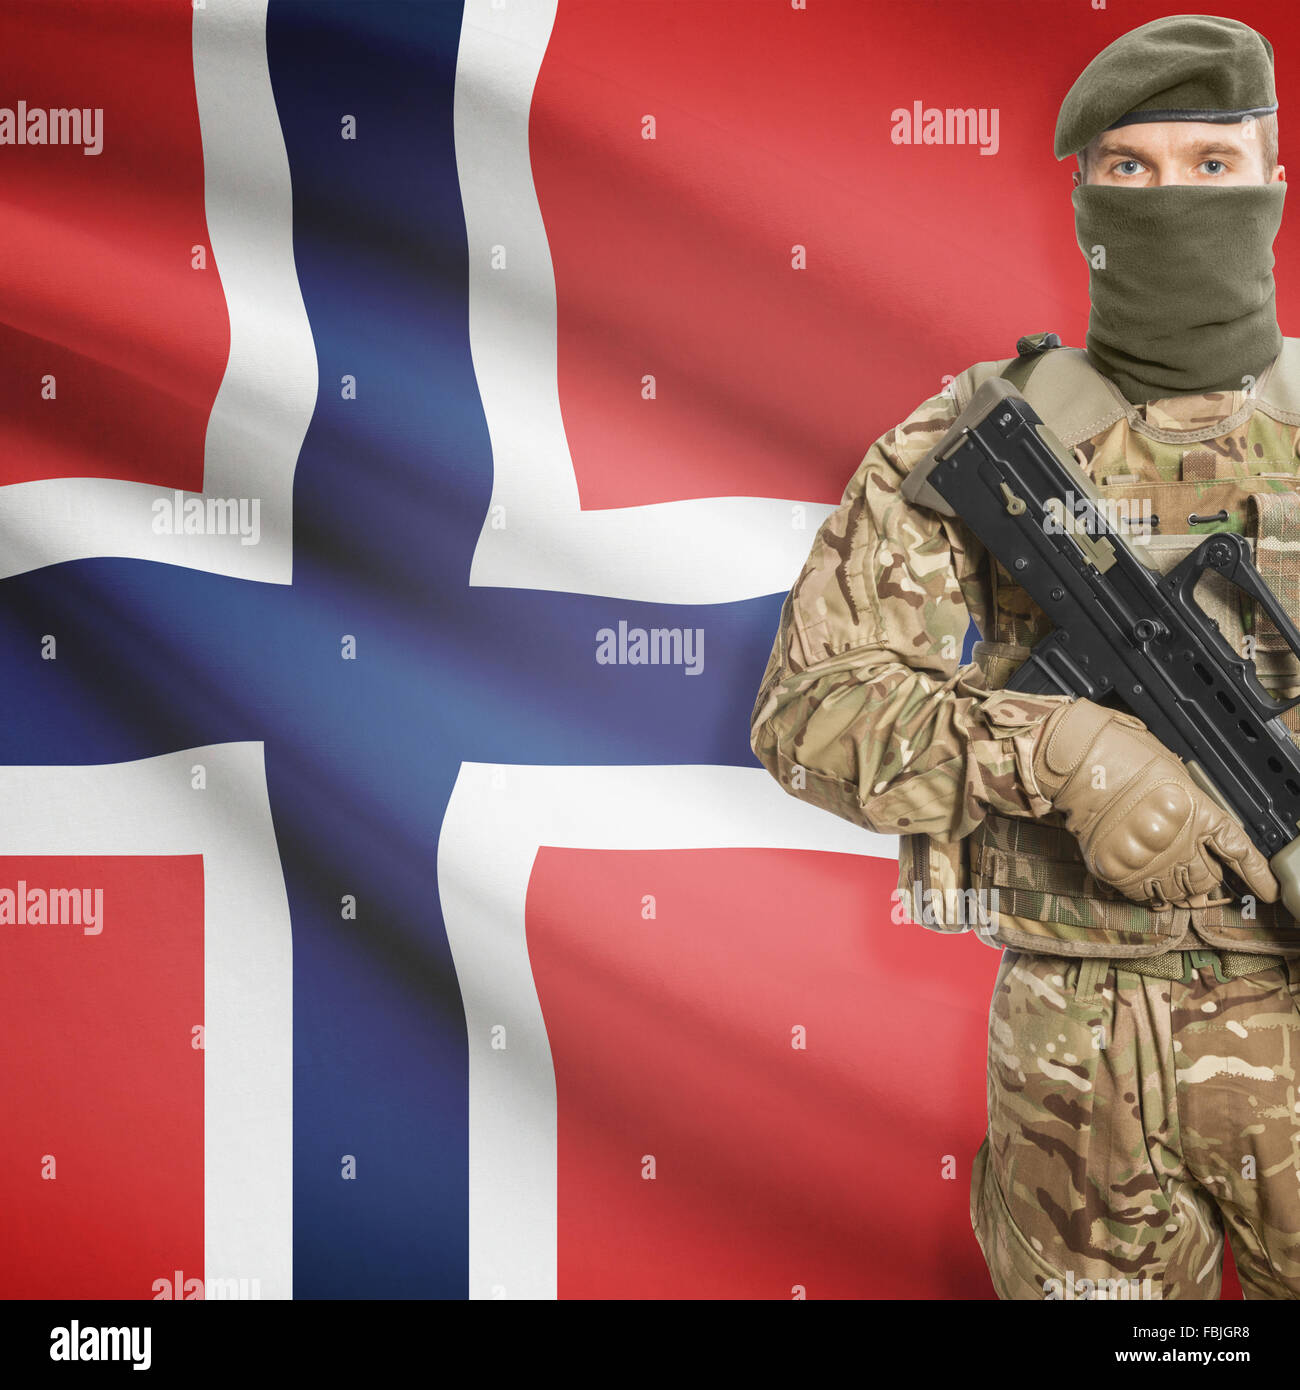 Soldier with machine gun and national flag on background series - Norway Stock Photo